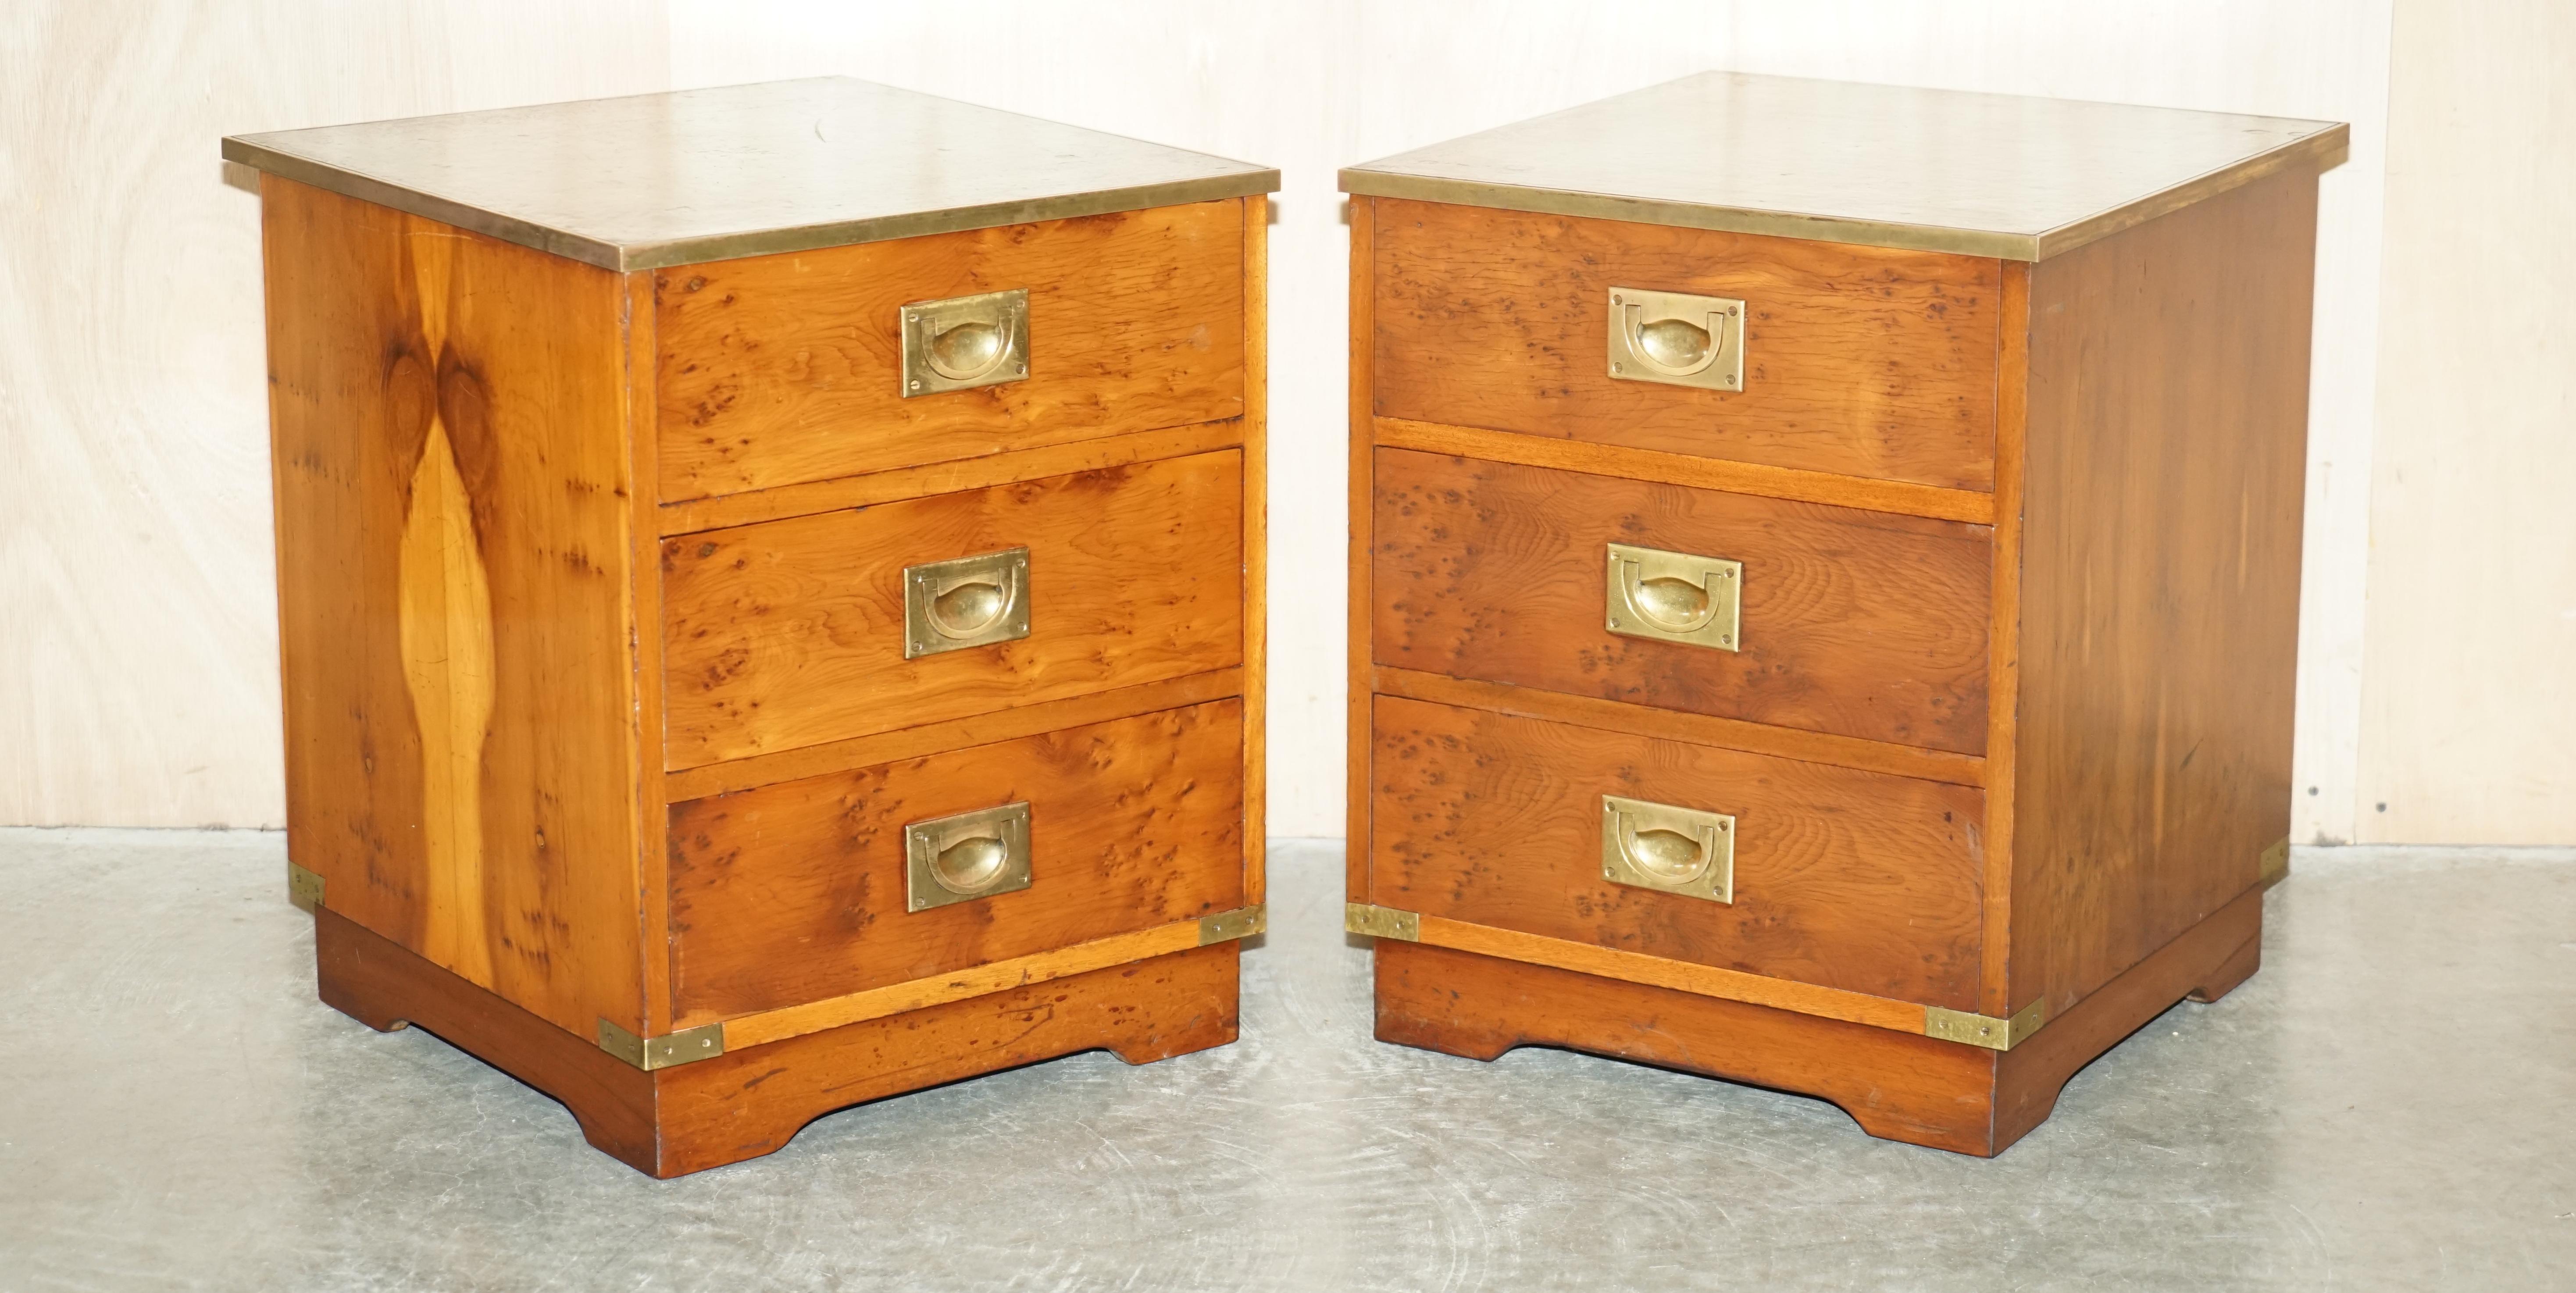 We are delighted to offer for sale this sublime pair of vintage Bevan Funnell Military Campaign side tables with drawers and green leather tops in Burr Yew wood

A truly stunning and well made pair by Bevan Funnell circa 1960's. They work in